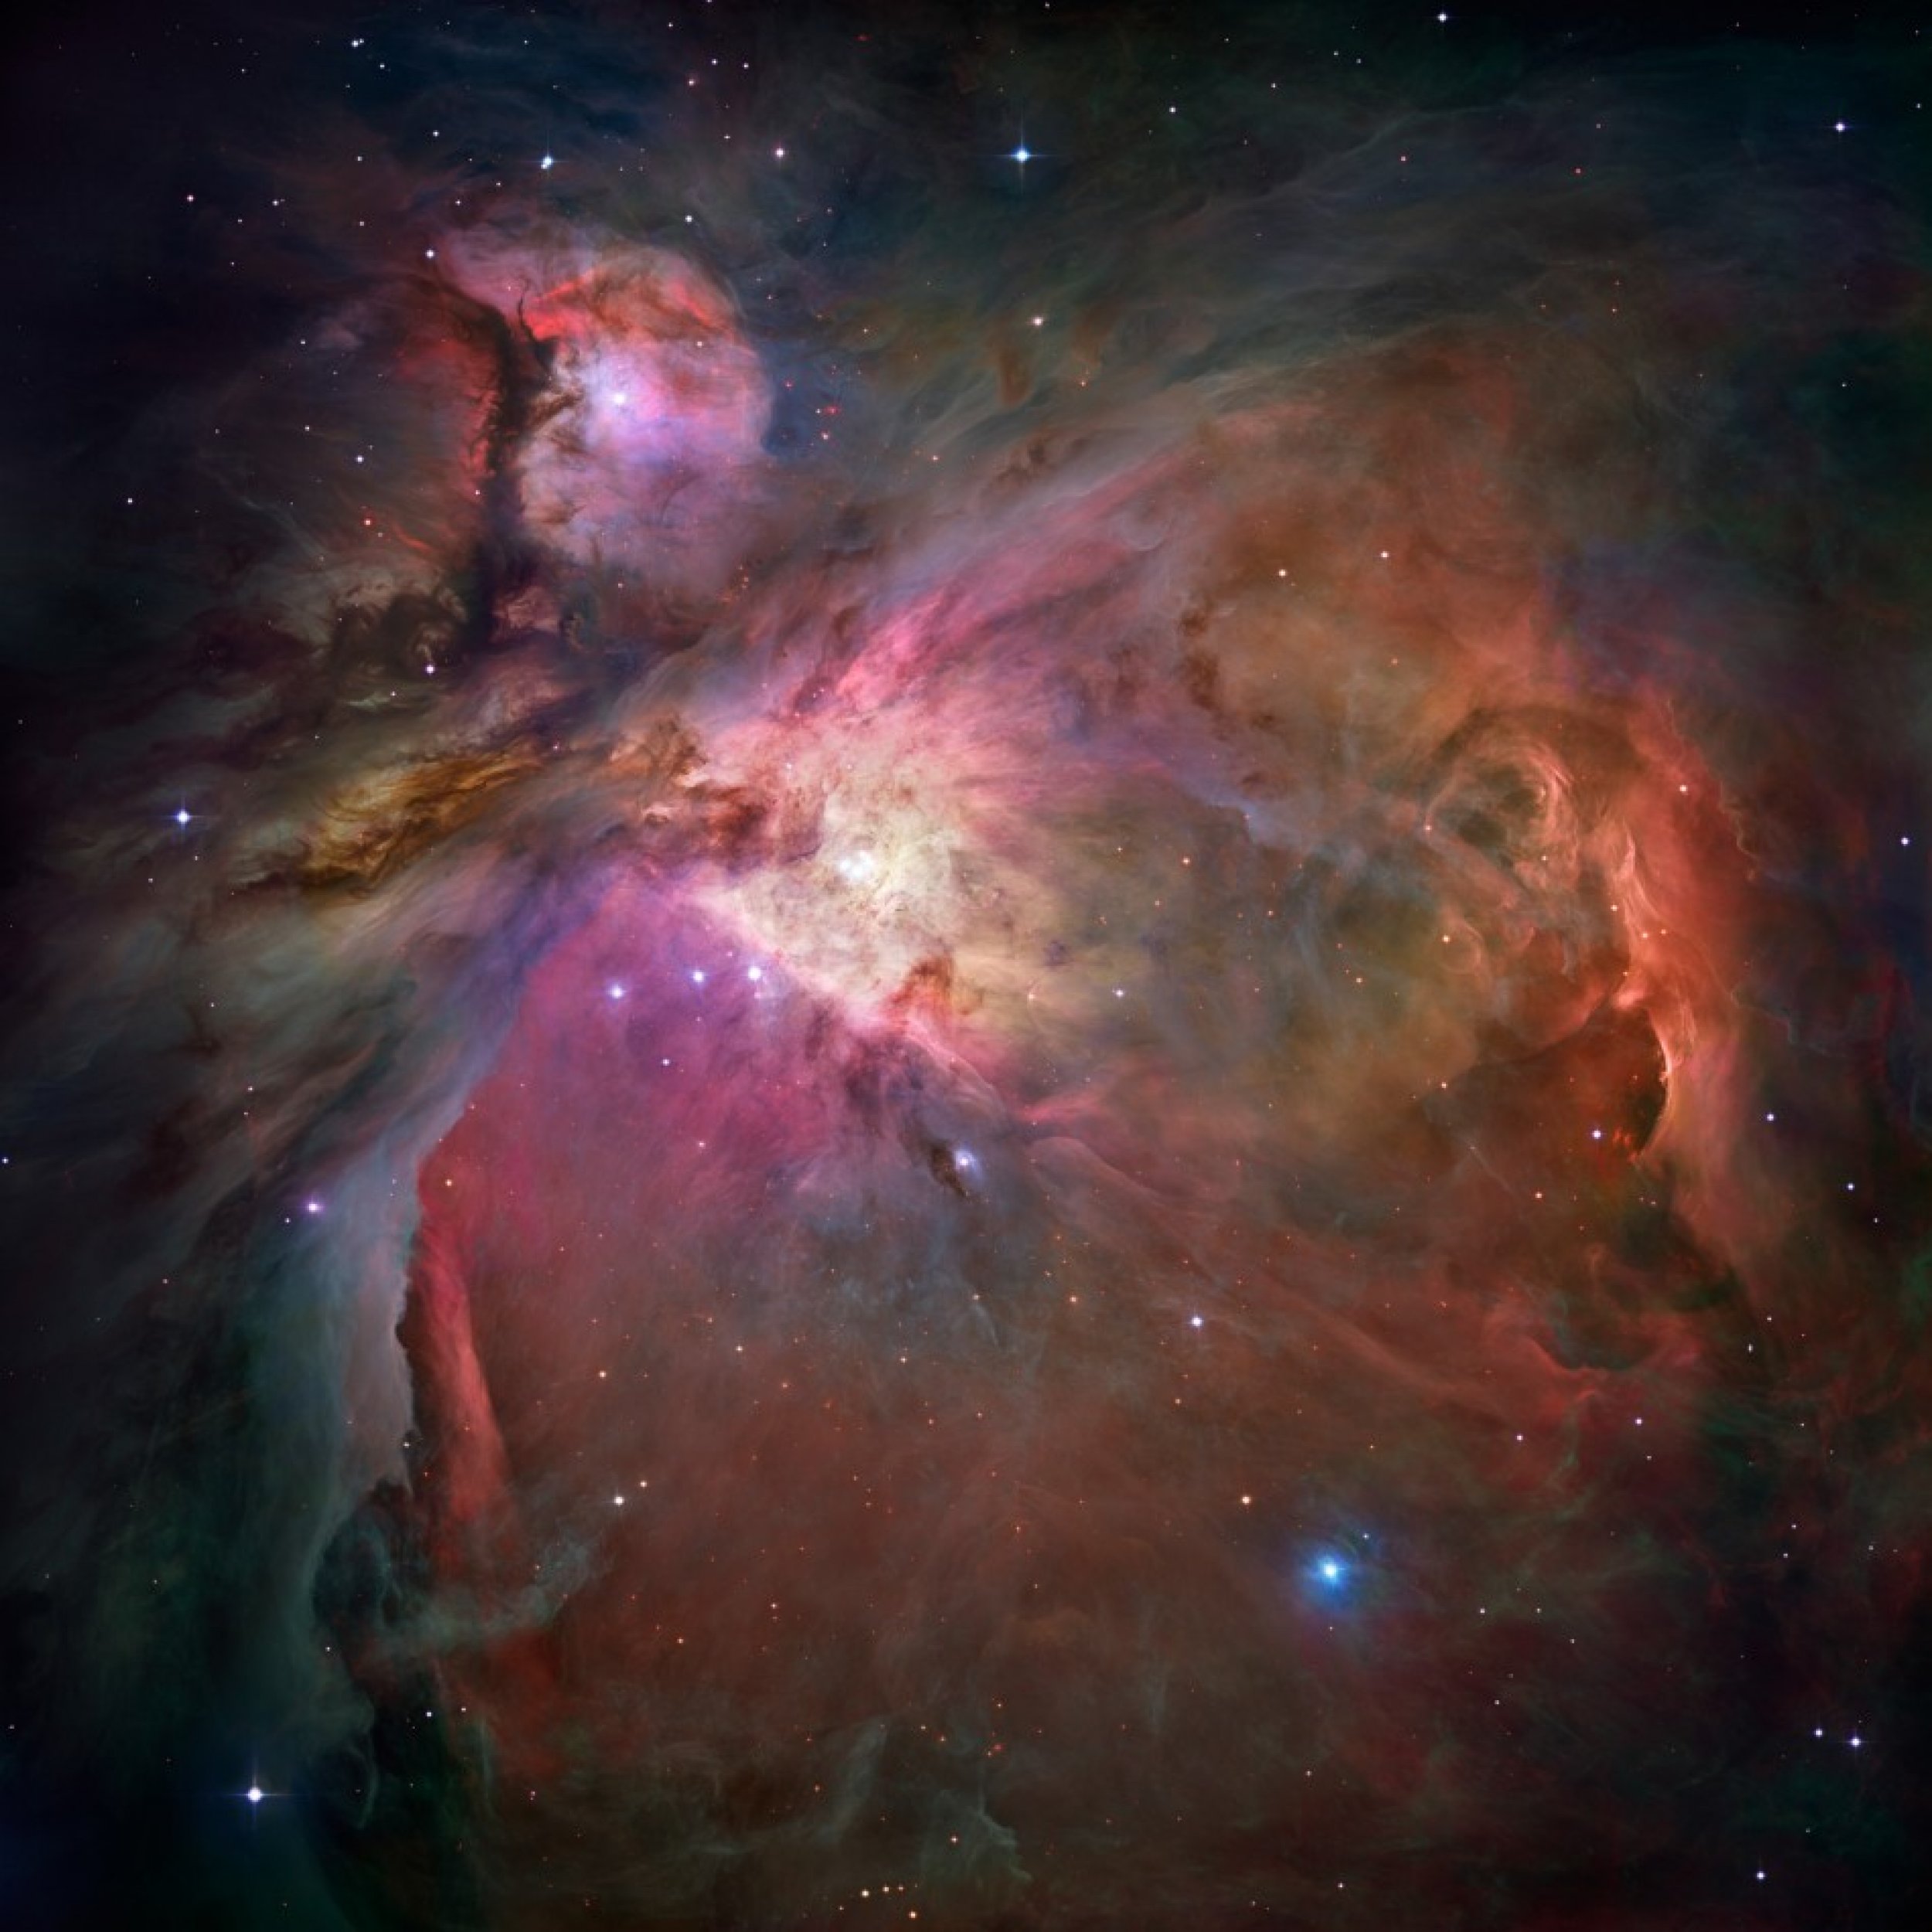 Hubbles sharpest view of the Orion Nebula, part of the Orion region